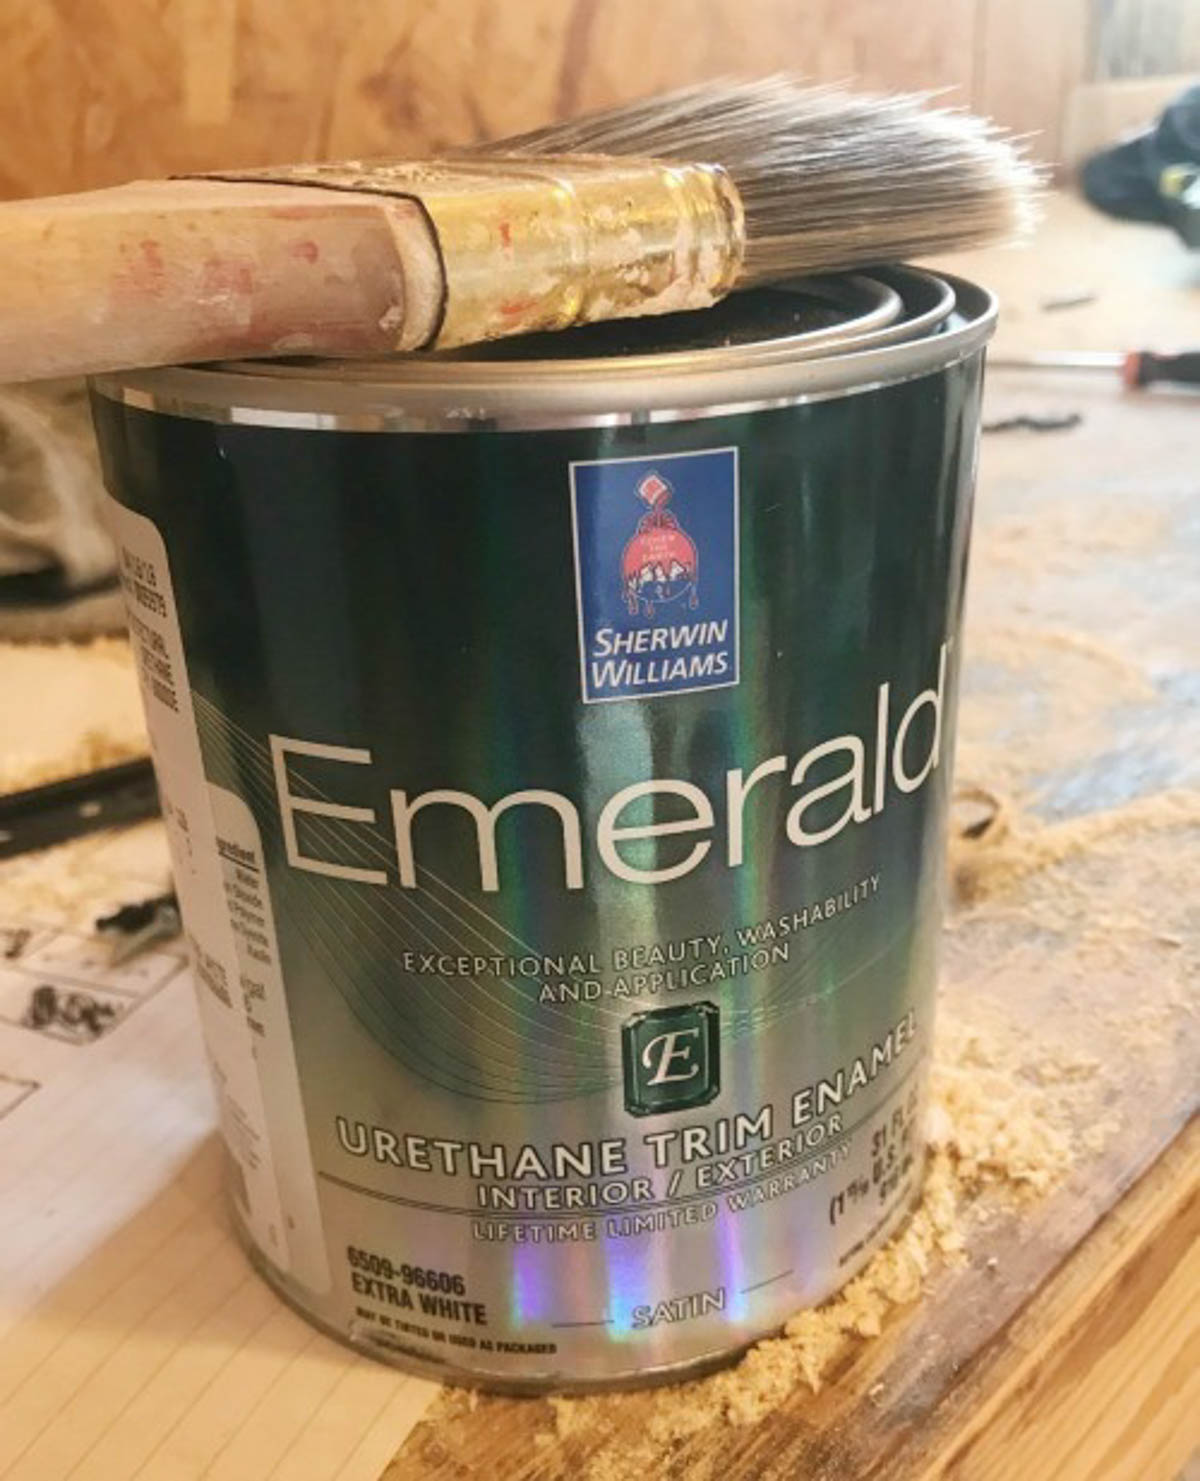 Sherwin williams Emerald paint can--diy furniture tip to use the correct type of finish